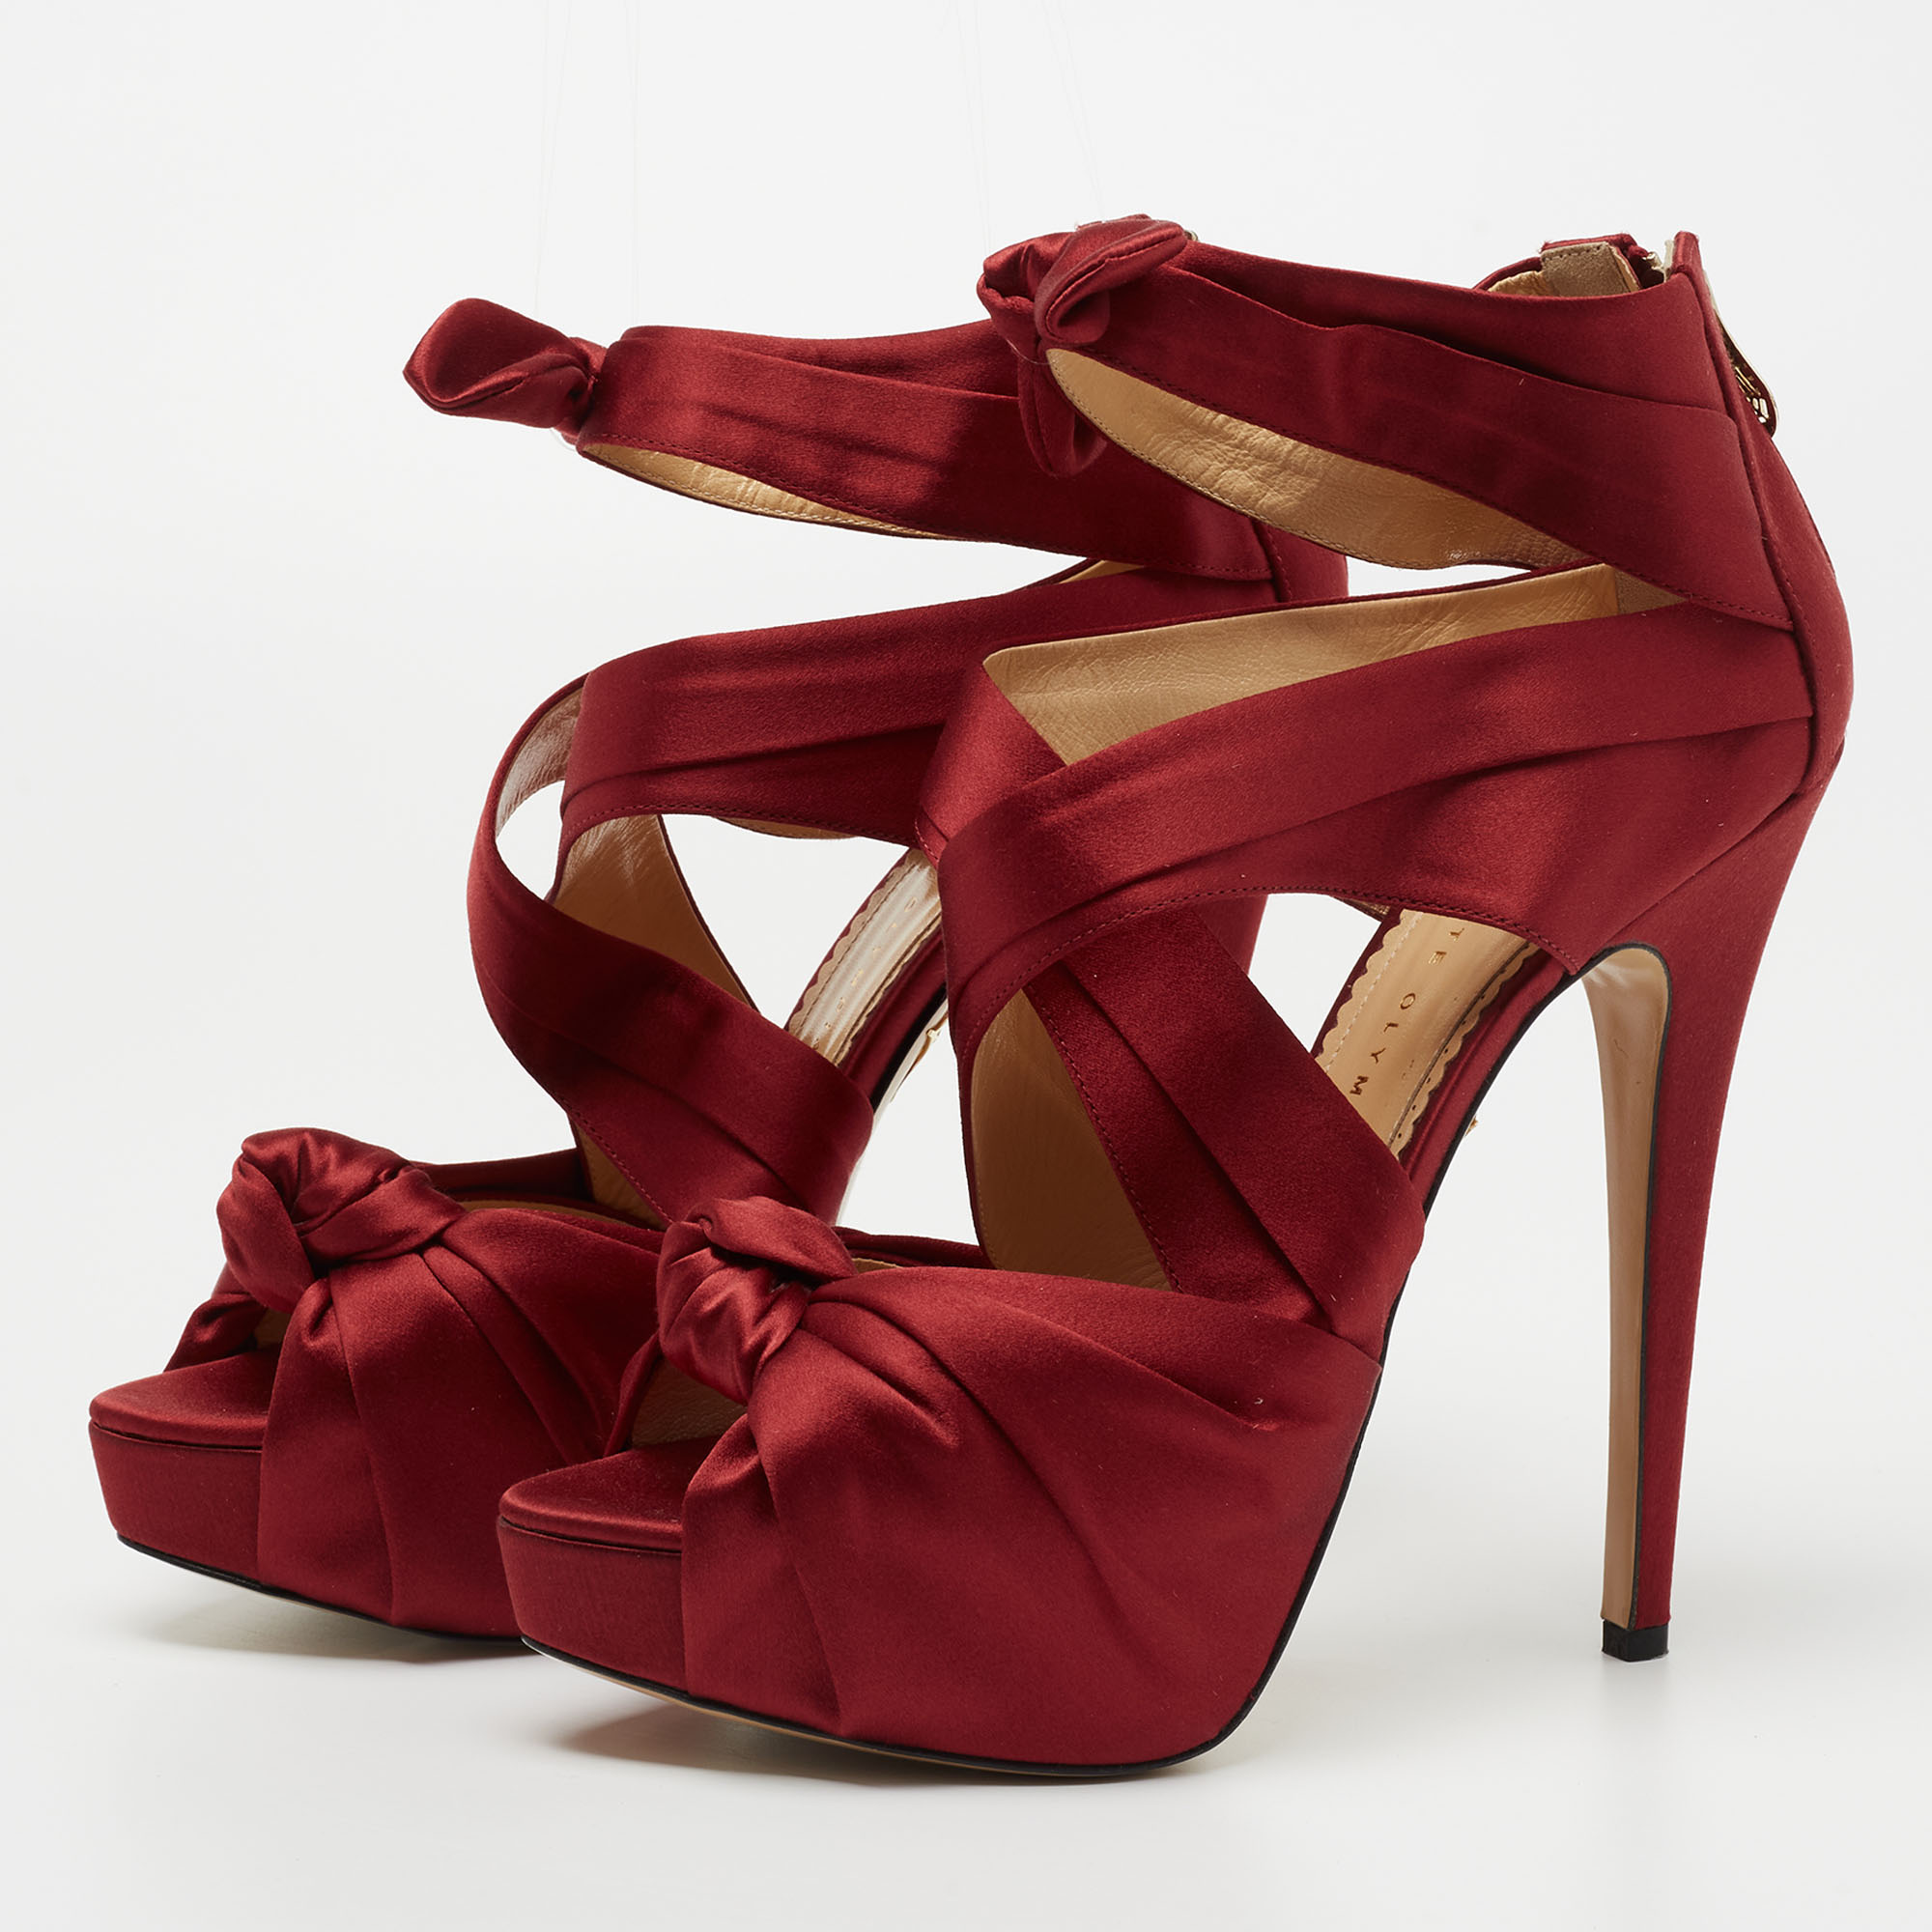 

Charlotte Olympia Red Satin Knotted Andrea Platform Sandals Size